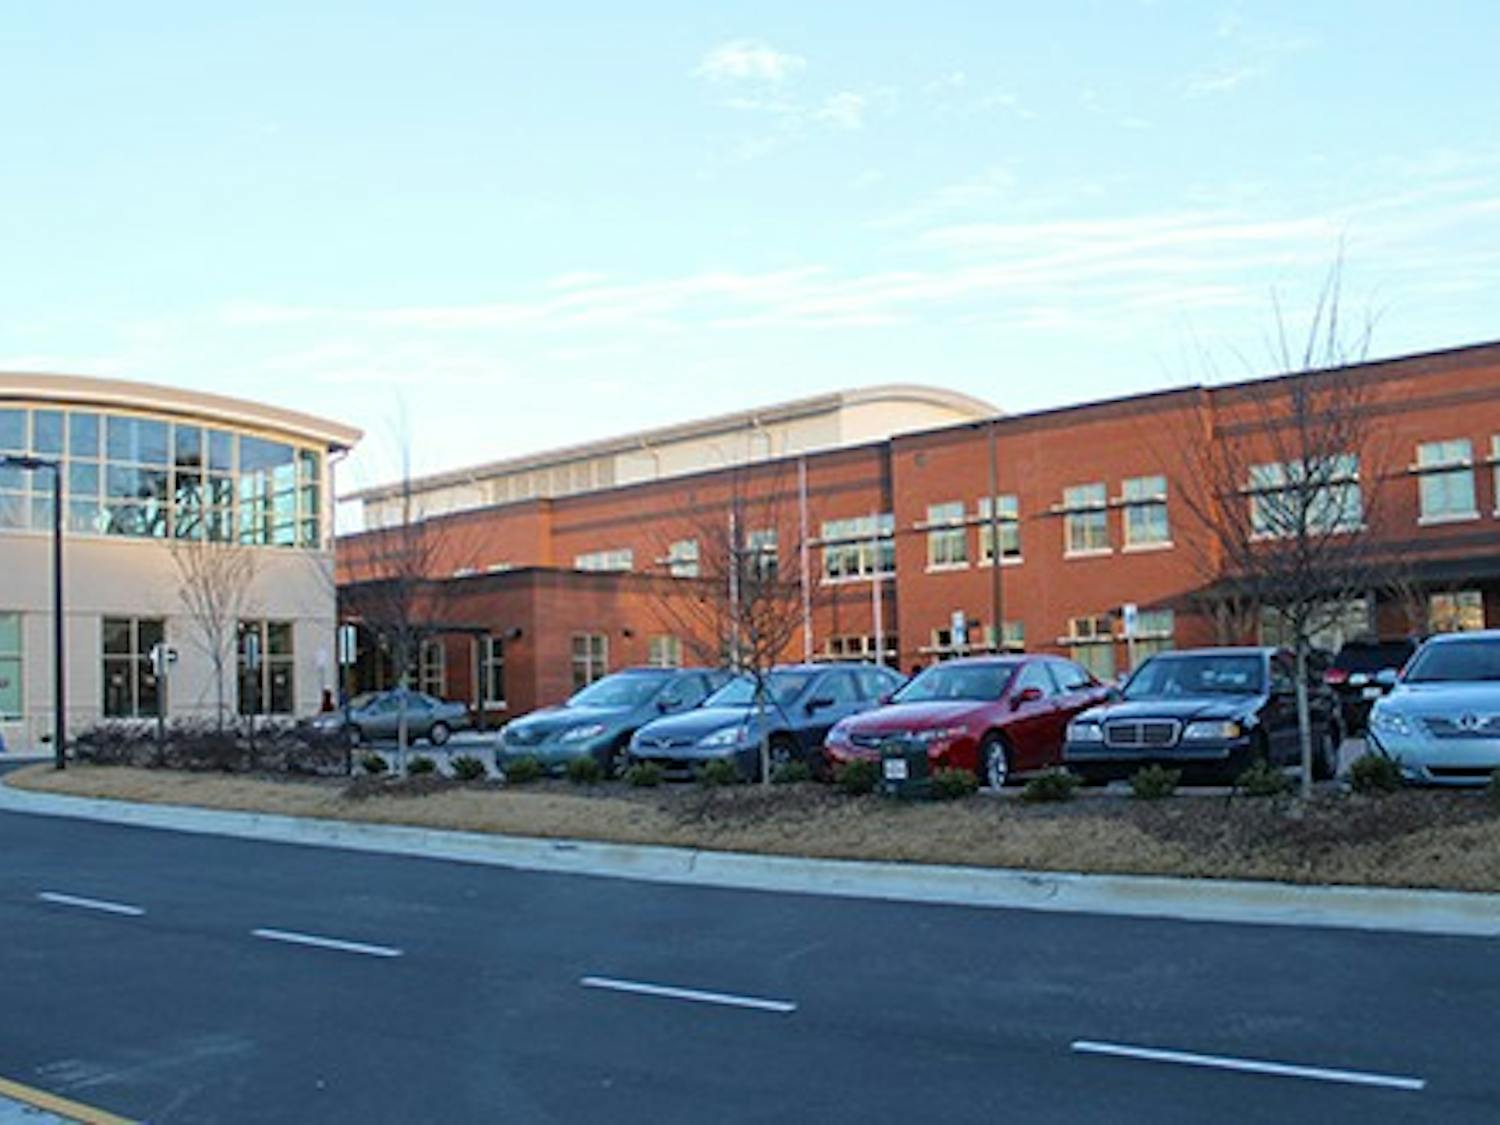 Moseley Architects is winning an award for their design of Northside Elementary School in Chapel Hill. Northside Elementary on Wednesday morning. North Carolina School Boards Association's Award for Excellence in Architectural Design